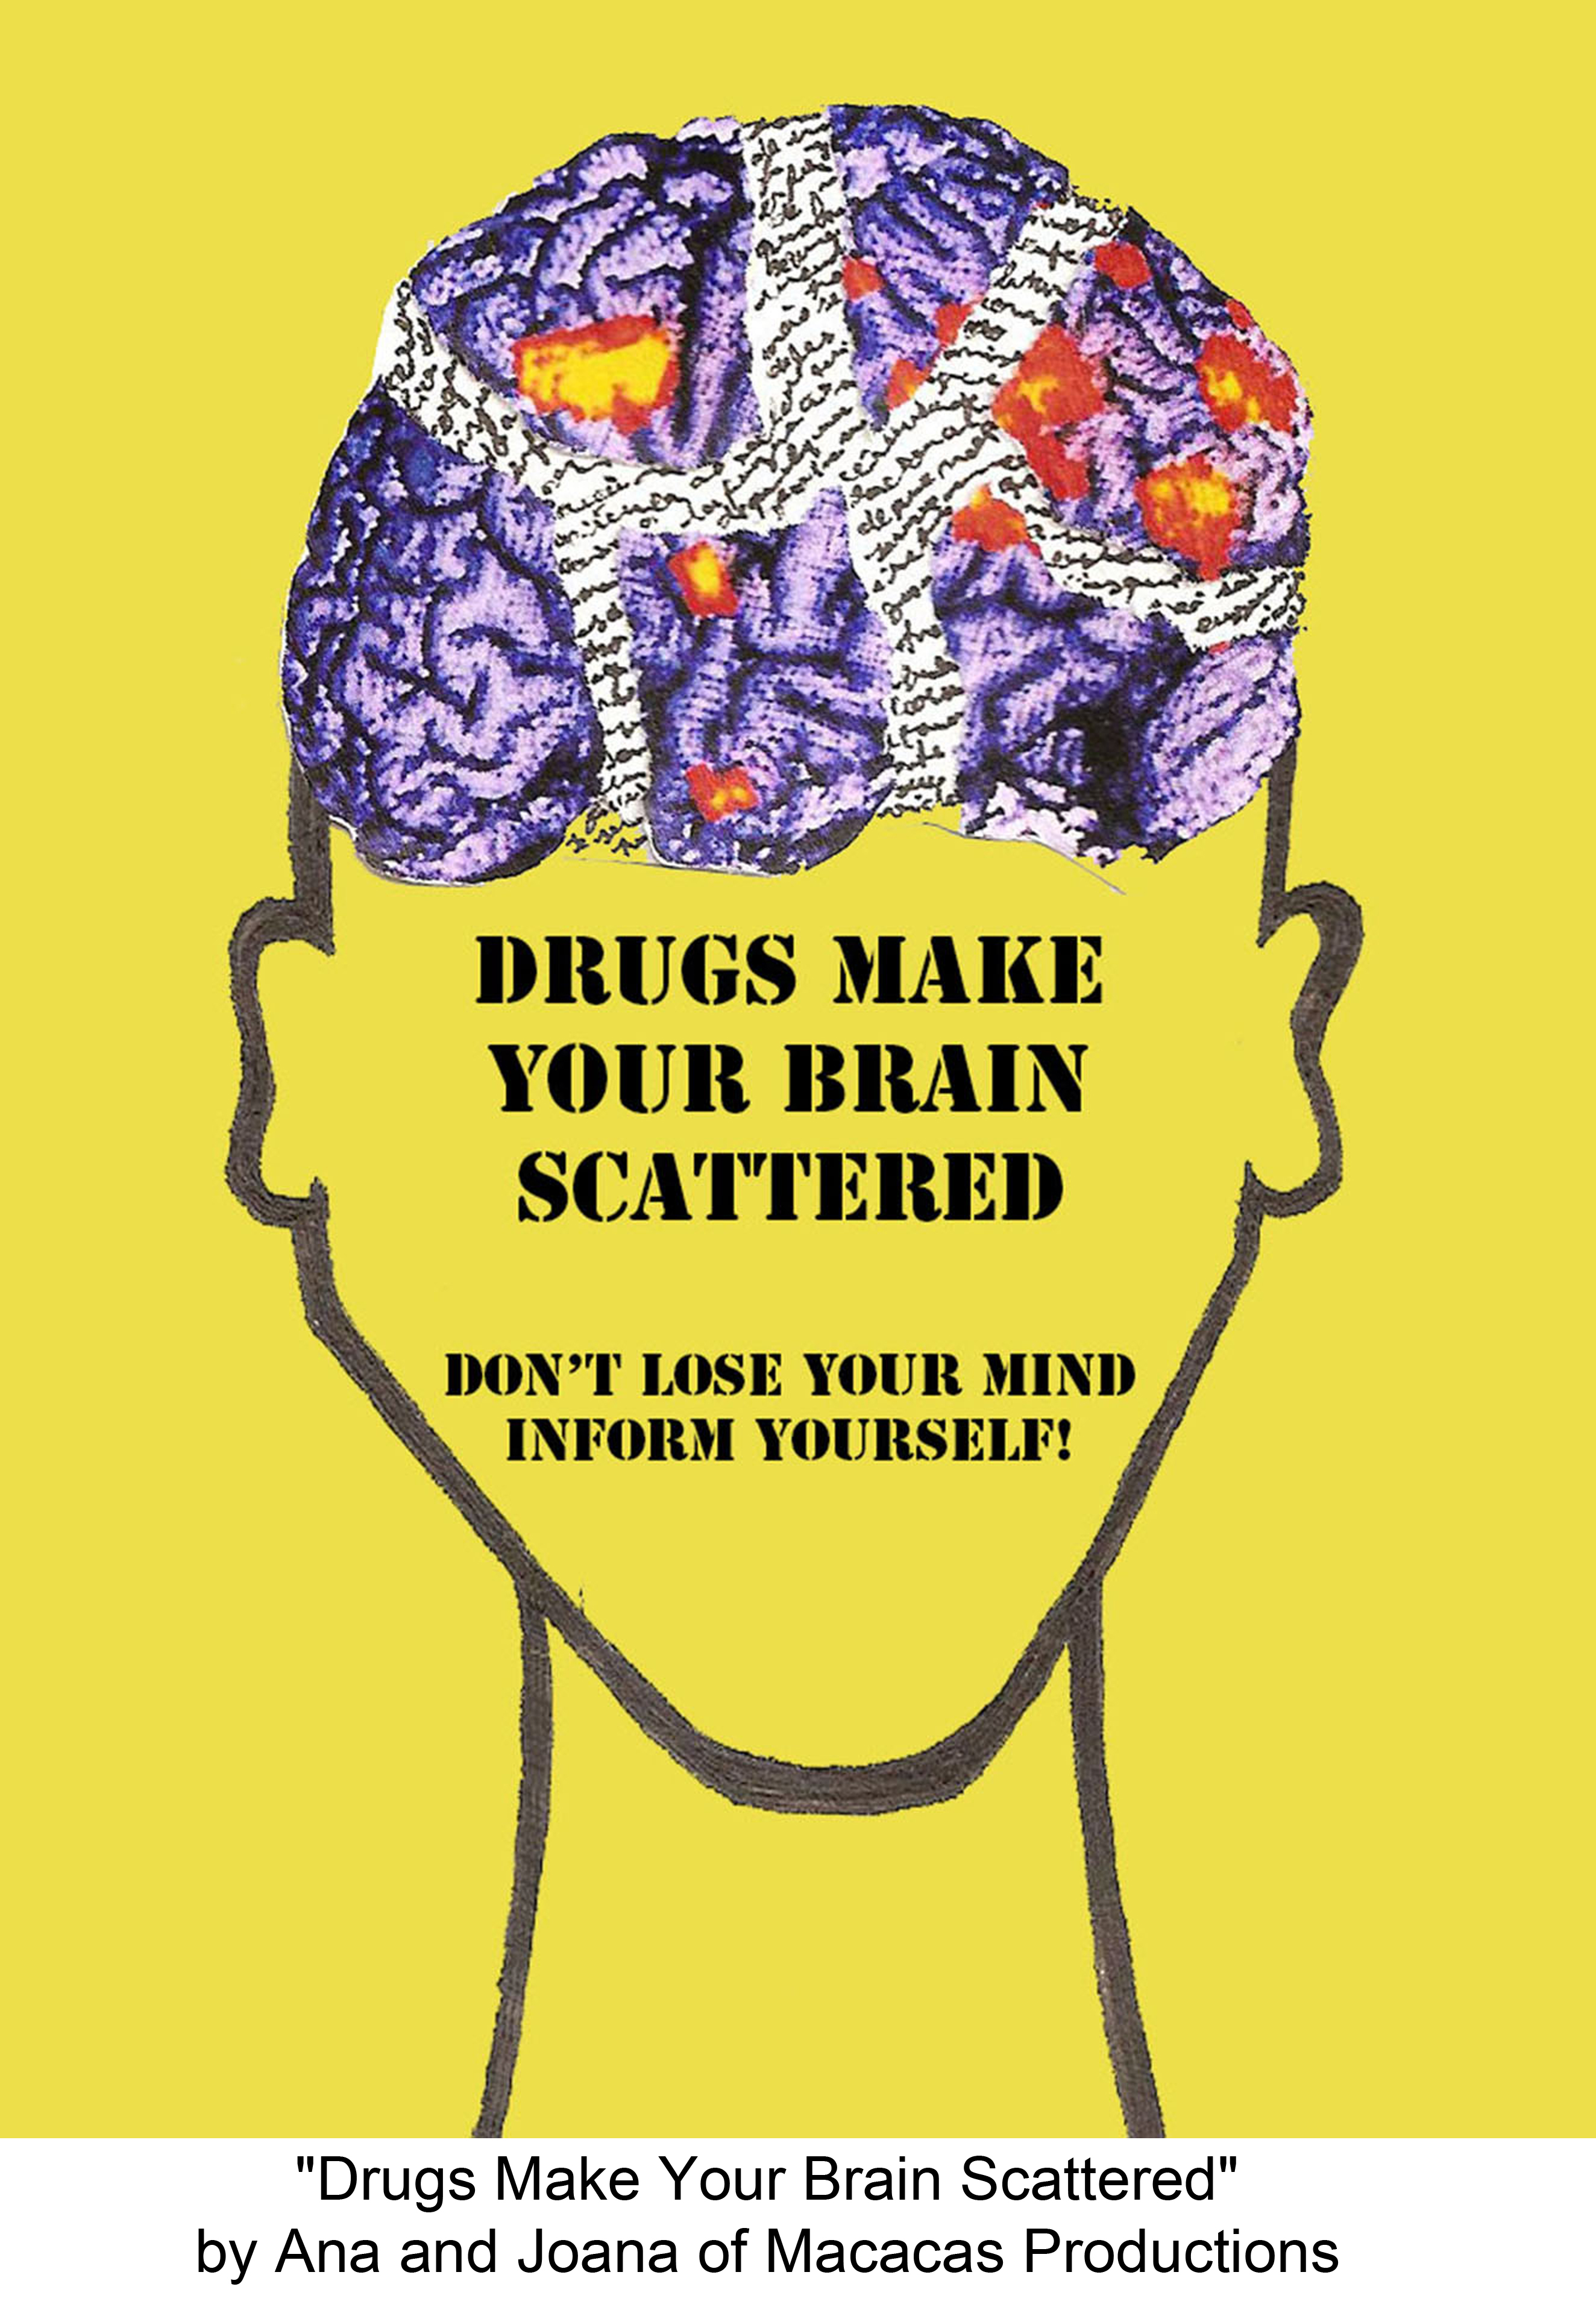 Drugs Make Your Brain Scattered by Macacas Productions